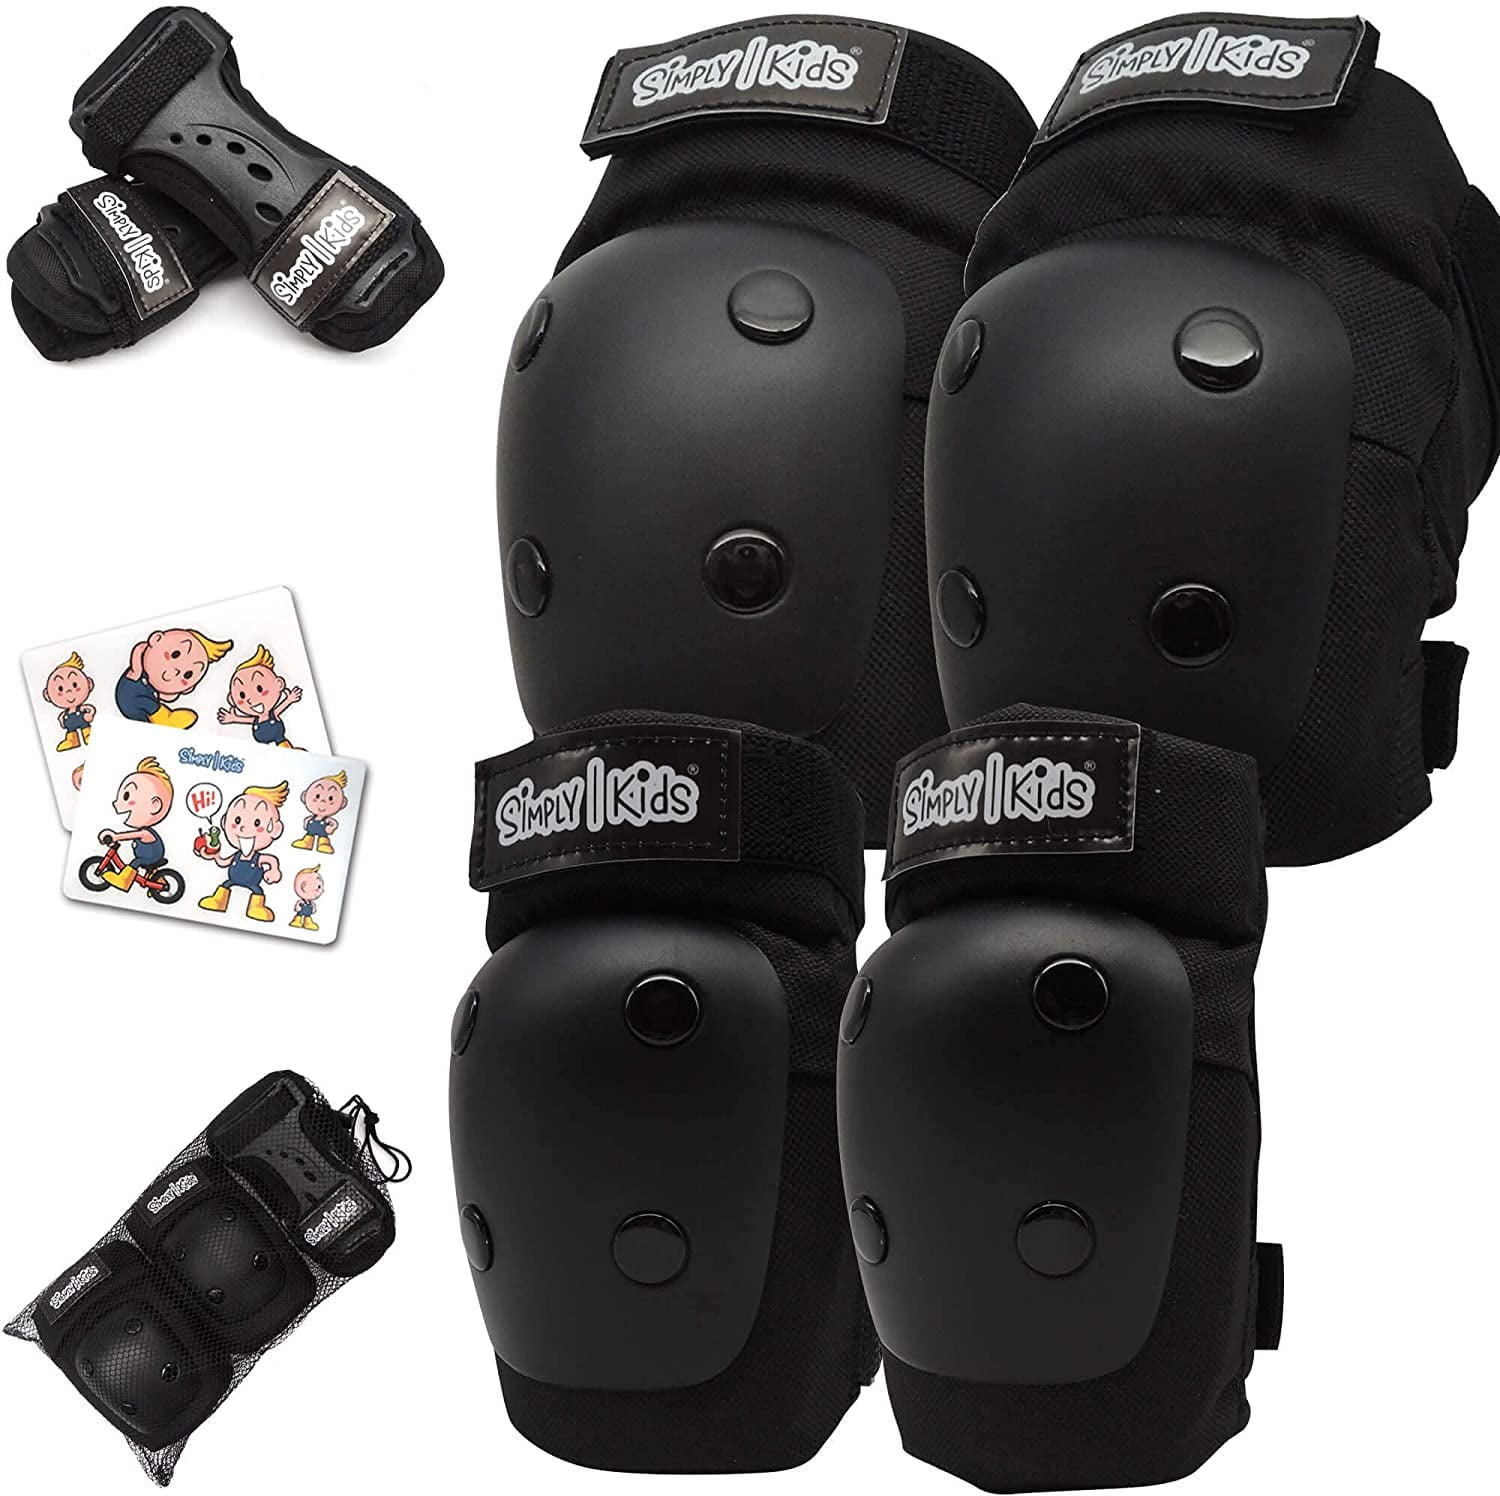 2 Elbow Pads & Gloves NIP LOL Surprise Child Protective Gear Set w/ 2 Knee Pads 